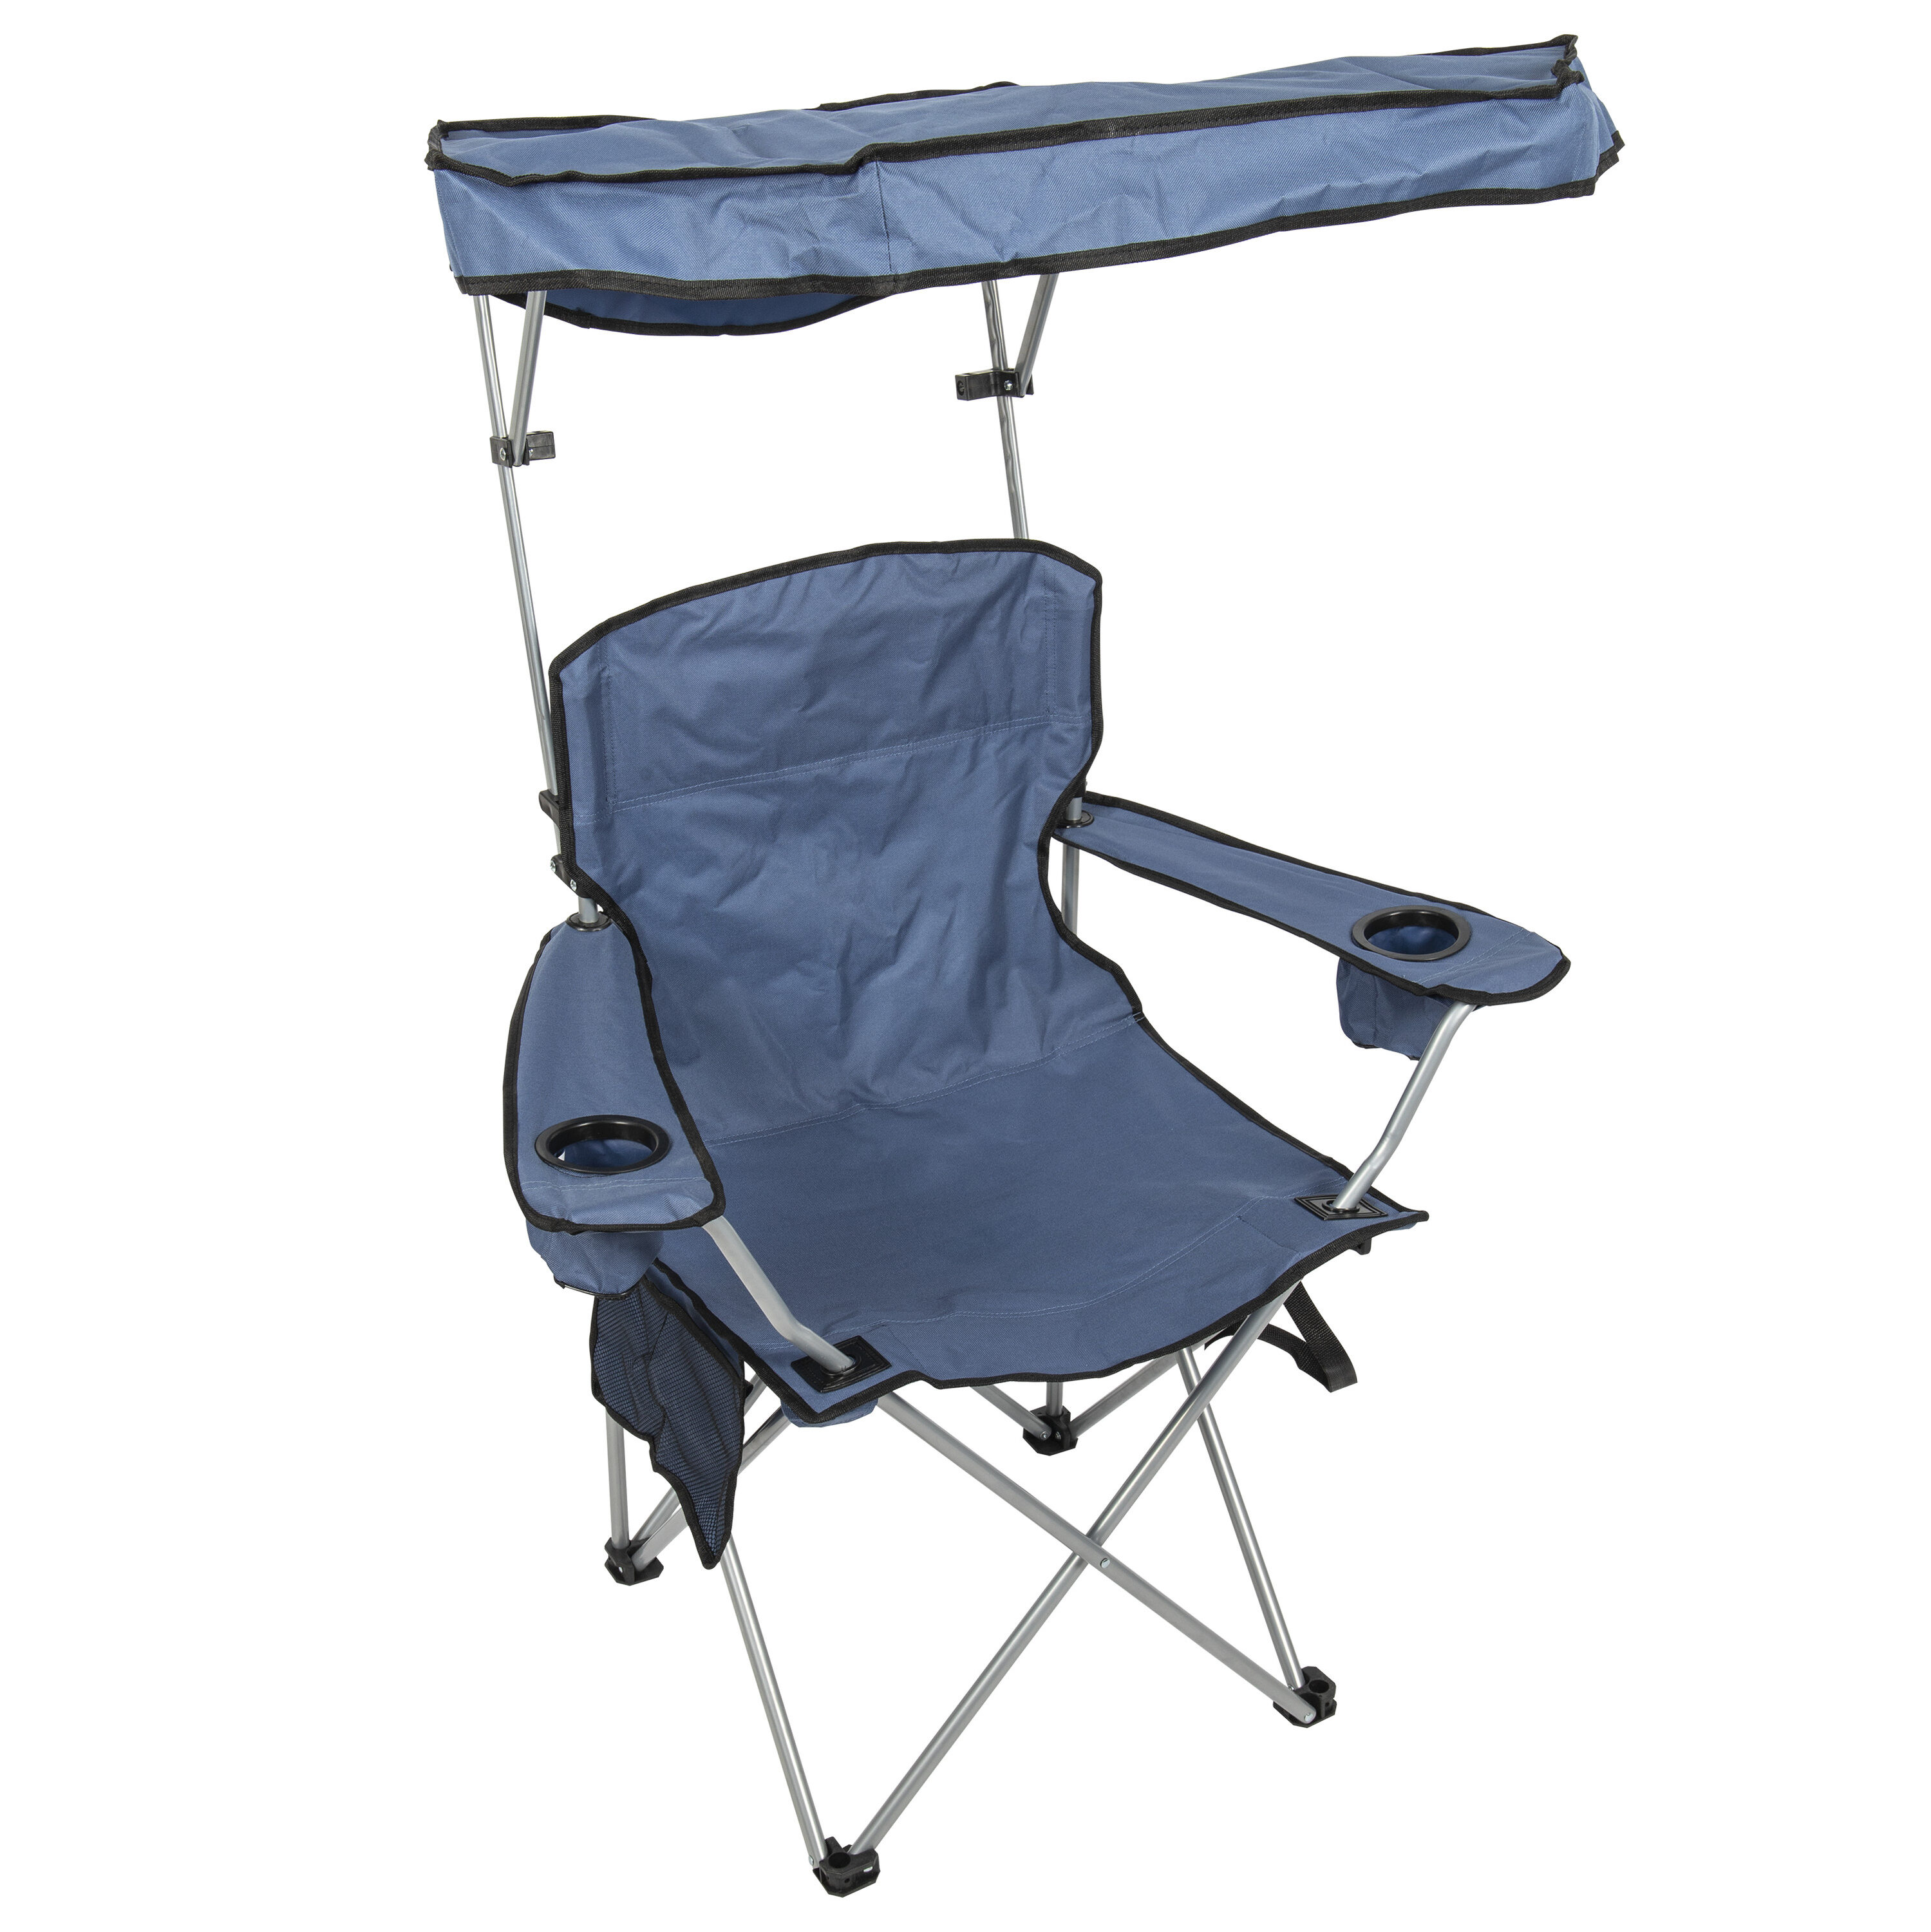 DROZIP Folding Chair Fishing Chair Beach Chair Outdoor Portable Chair Navy  Compact Folding Type, Sills Pluggable para exterior Silla de Camping